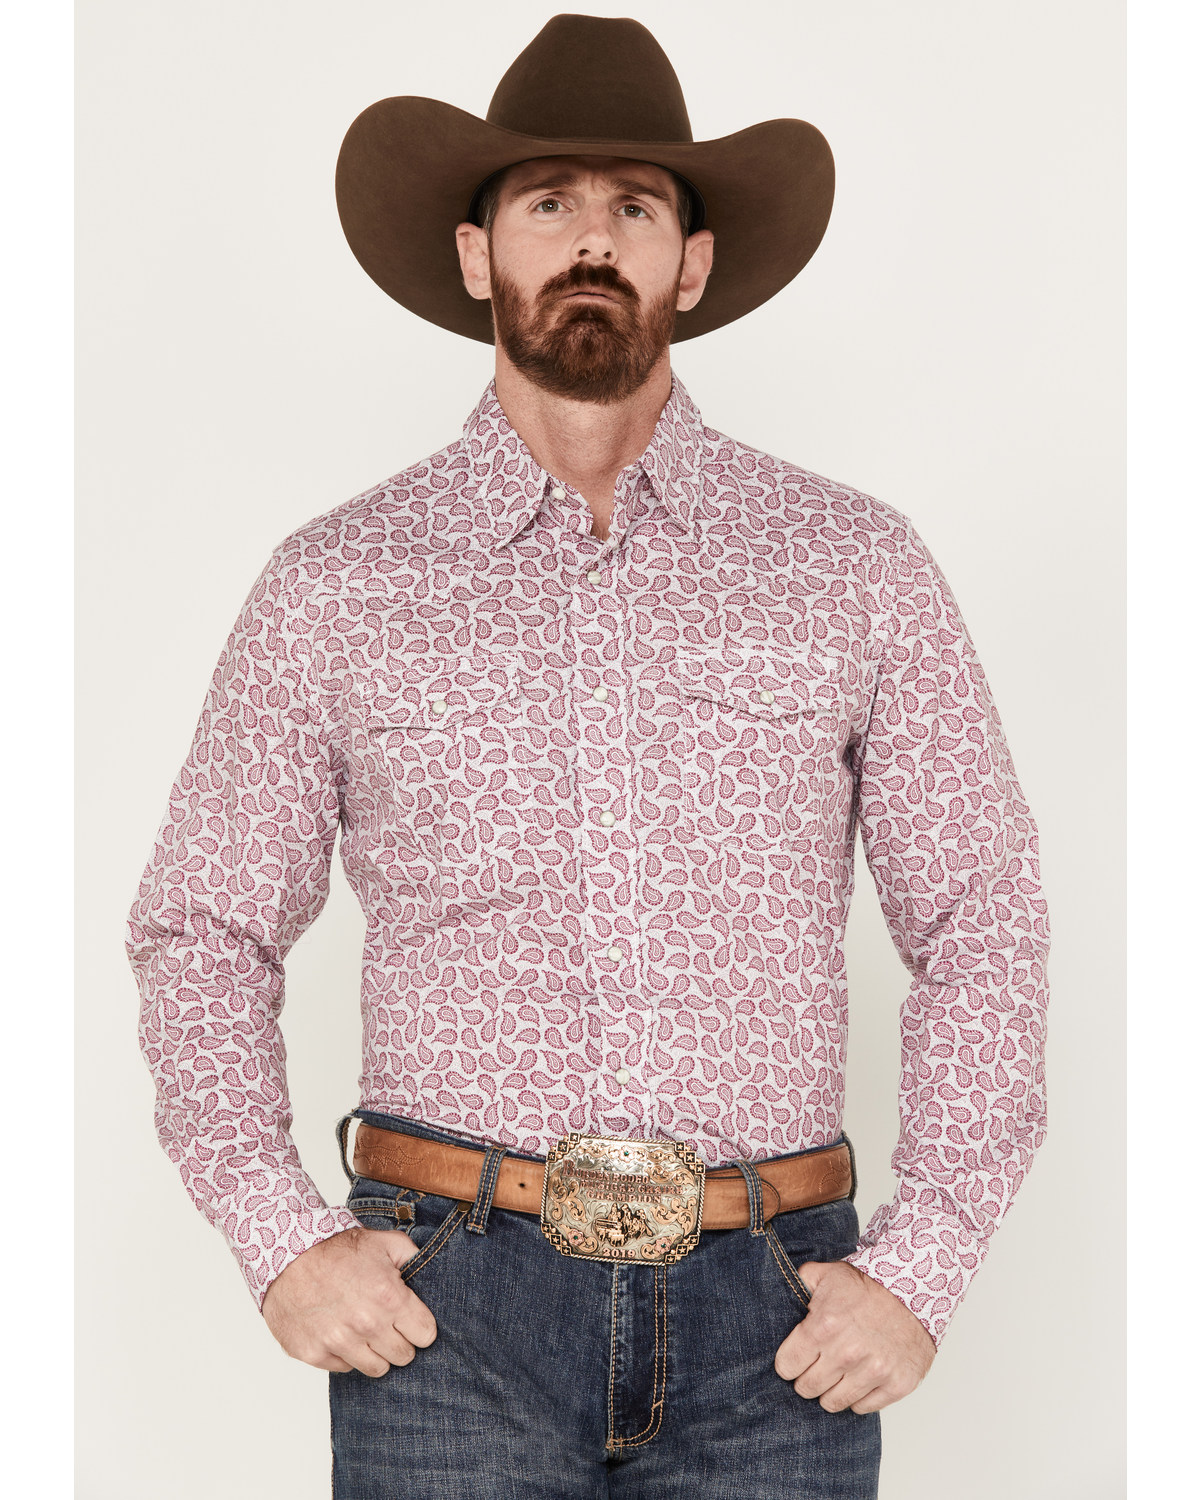 Wrangler 20x Men's Paisley Print Long Sleeve Pearl Snap Western Competition Shirt